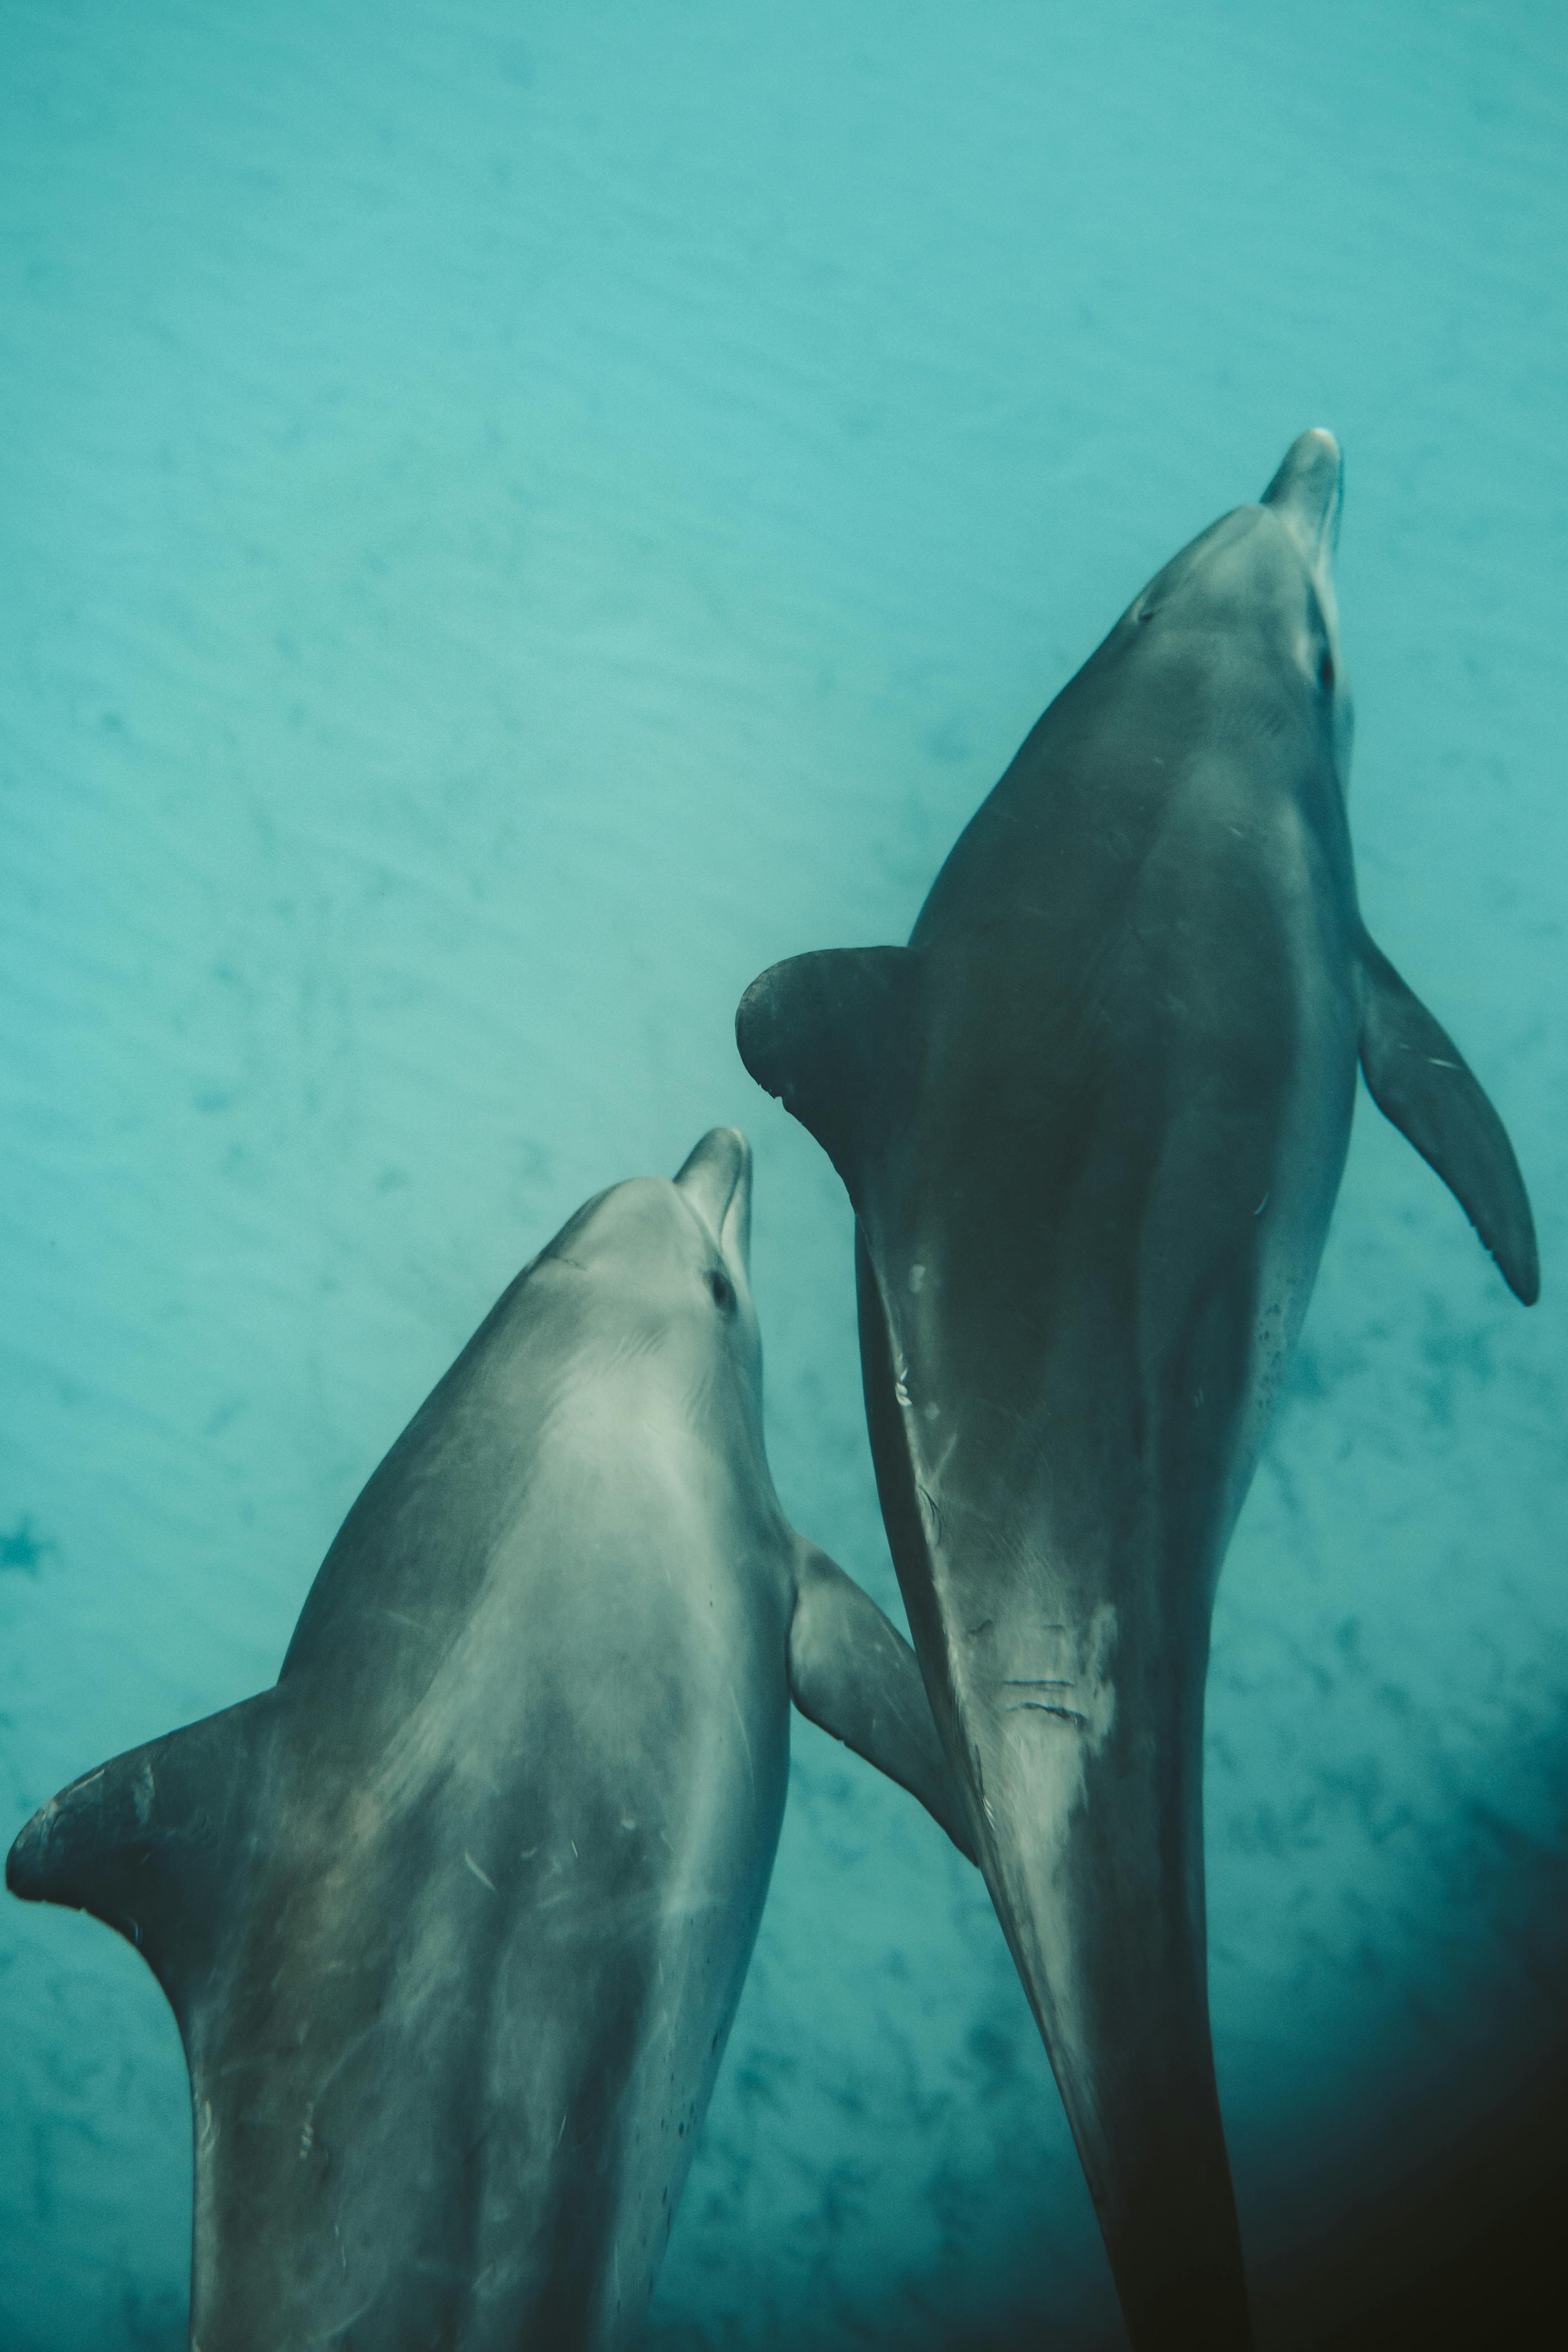 Dolphins | Source: Pexels